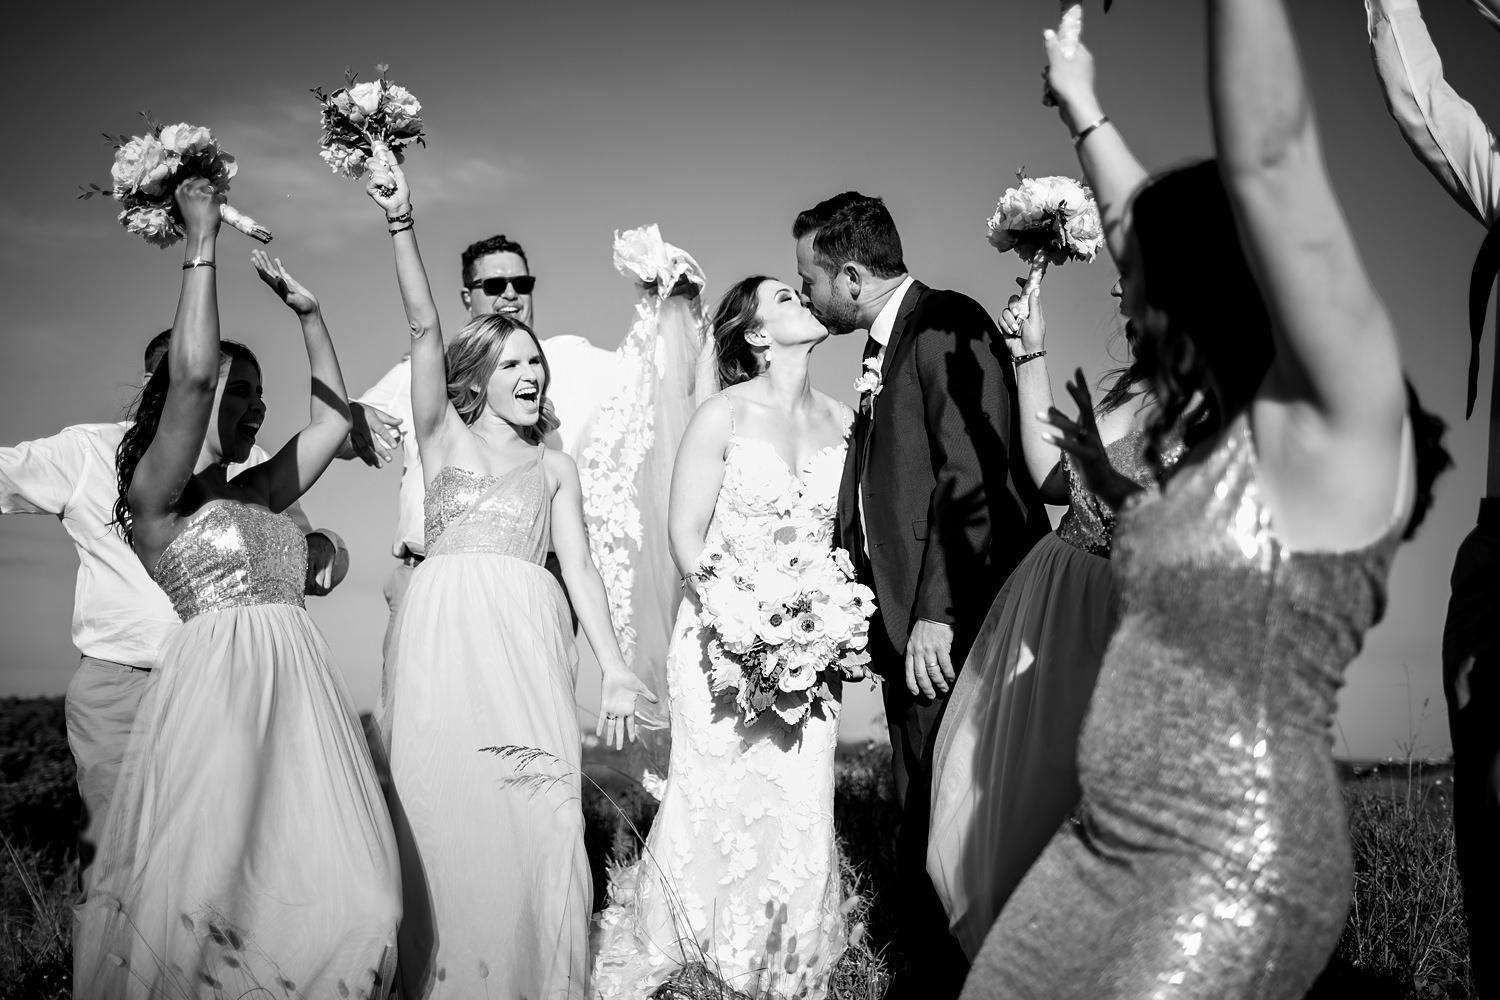 A photograph of the bridal entourage cheering as the bride and groom kiss by wedding photographer in South Africa, Niki M Photography